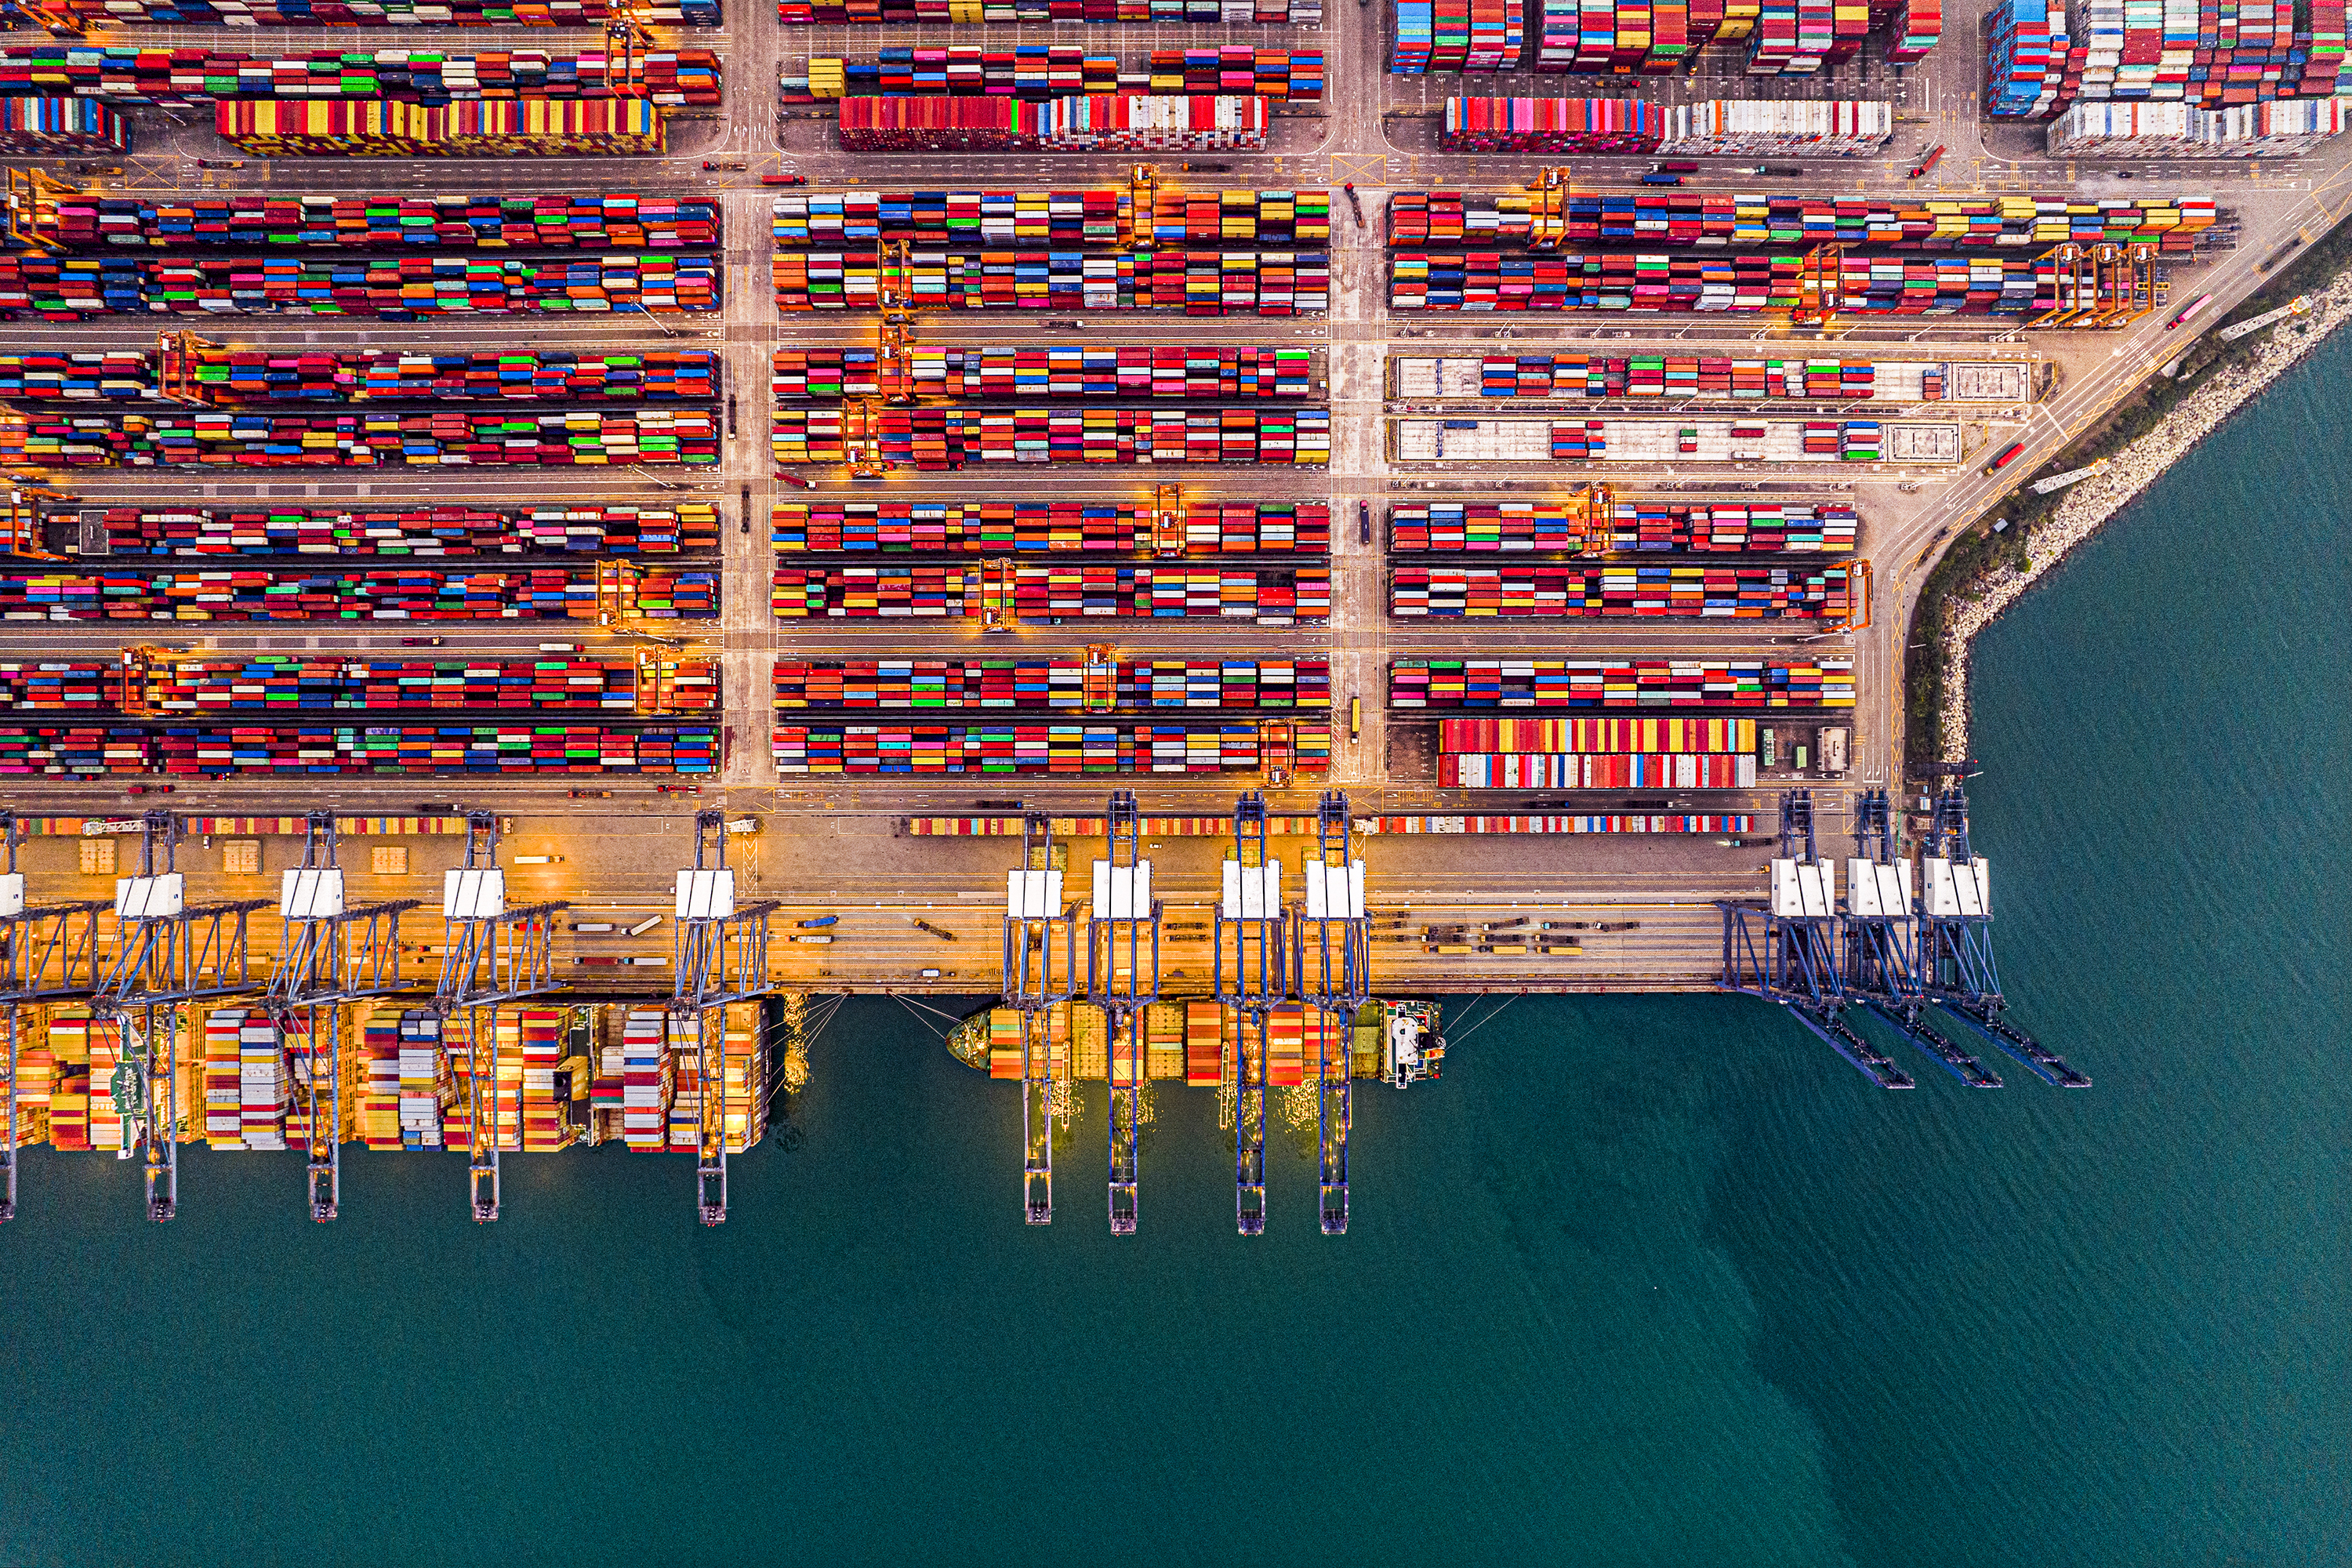 Aerial view of a port showing hundreds of shipping containers.